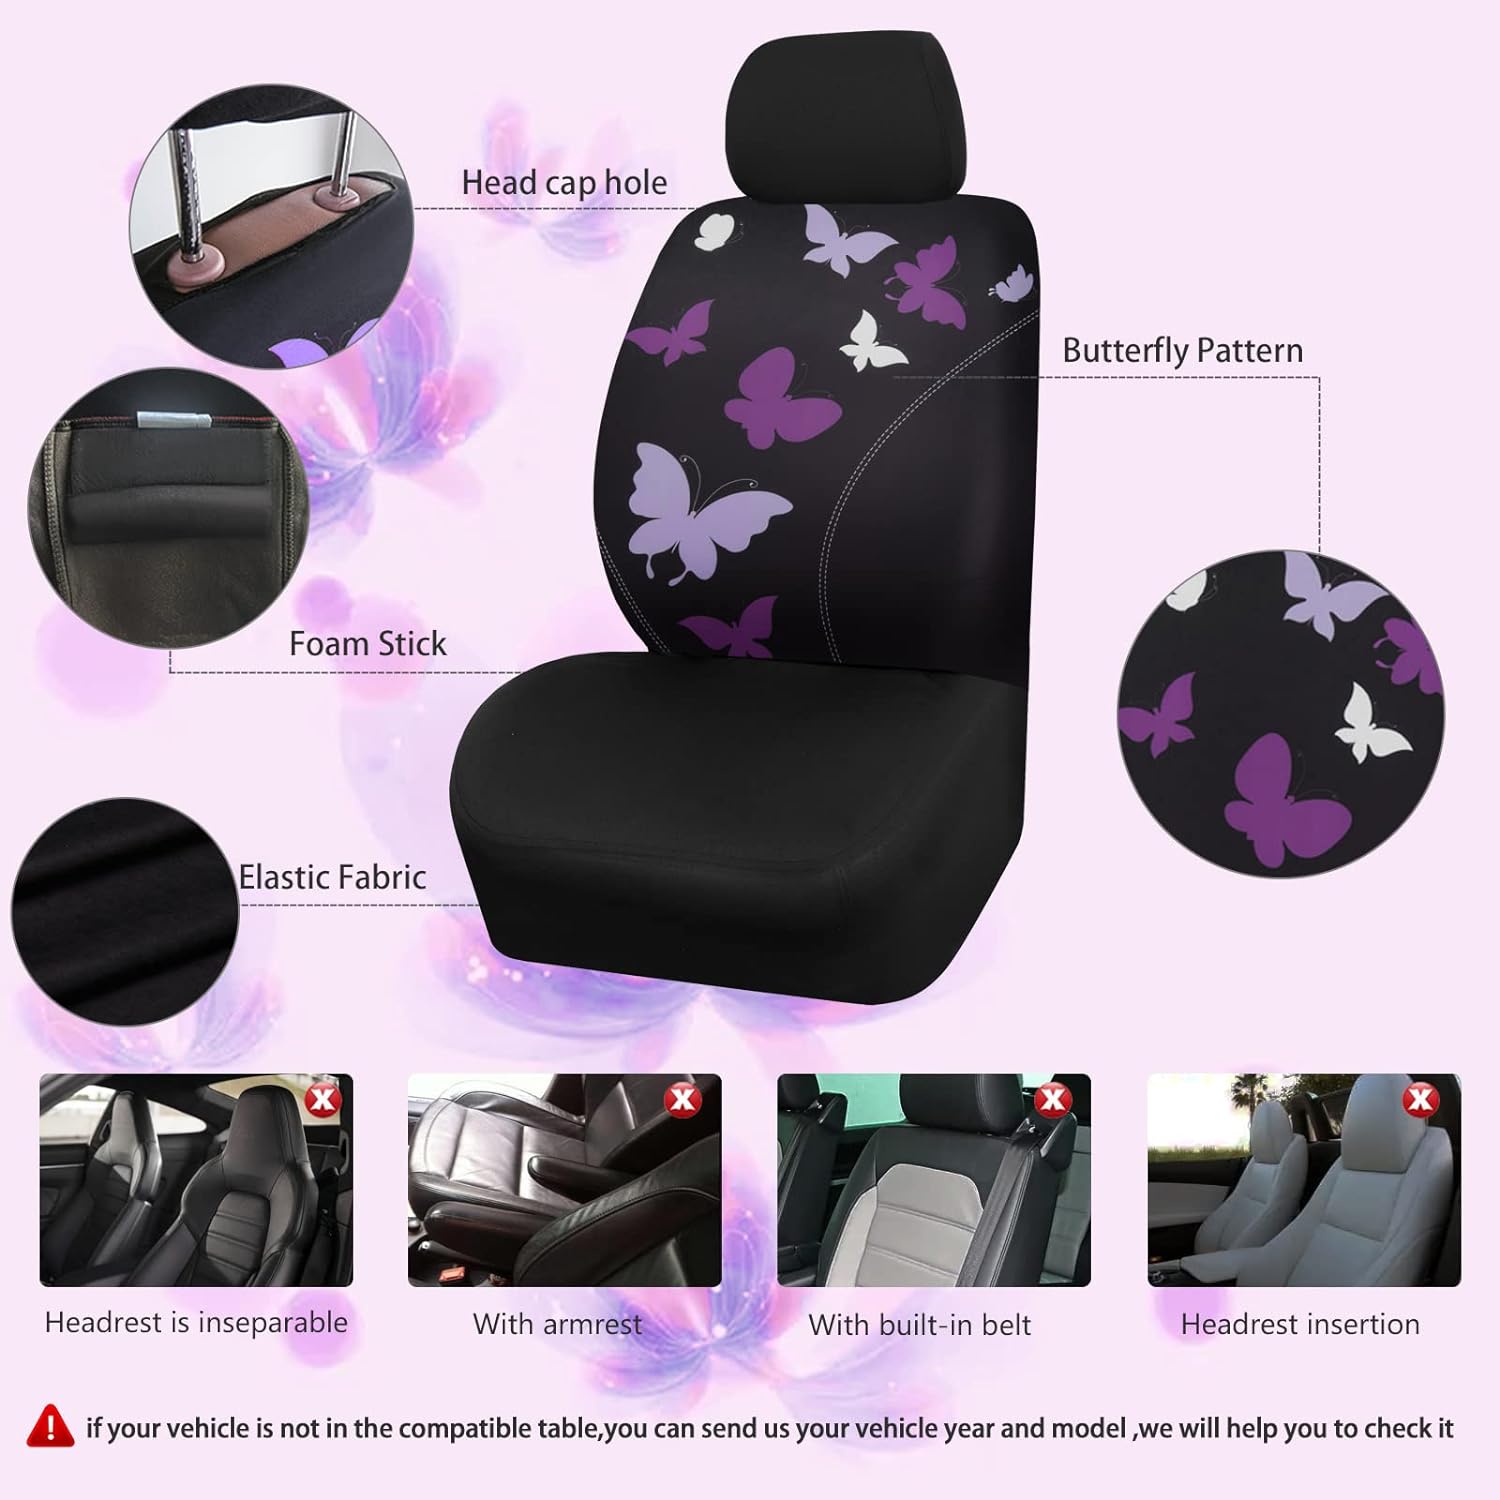 CAR PASS Unversial Flower and Butterfly Car Floor Mats and Car Seat Cover, for Cute Girly Women,Airbag Compatible,Fit for SUV,Sedans,Vans